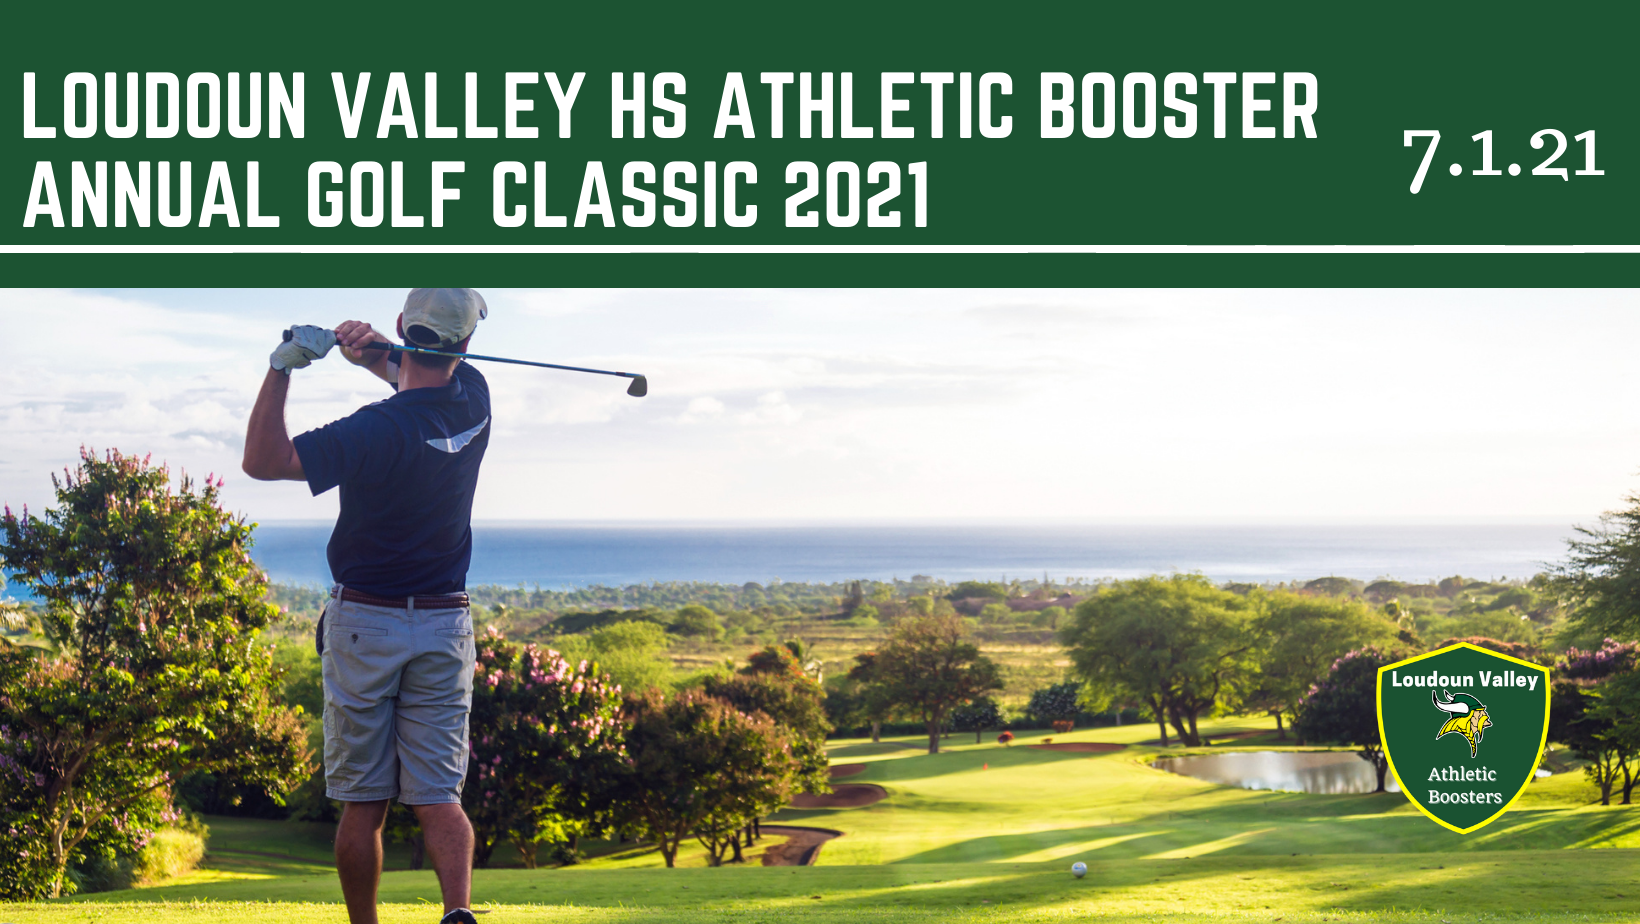 Loudoun Valley HS Athletic Booster Annual Golf Classic 2021